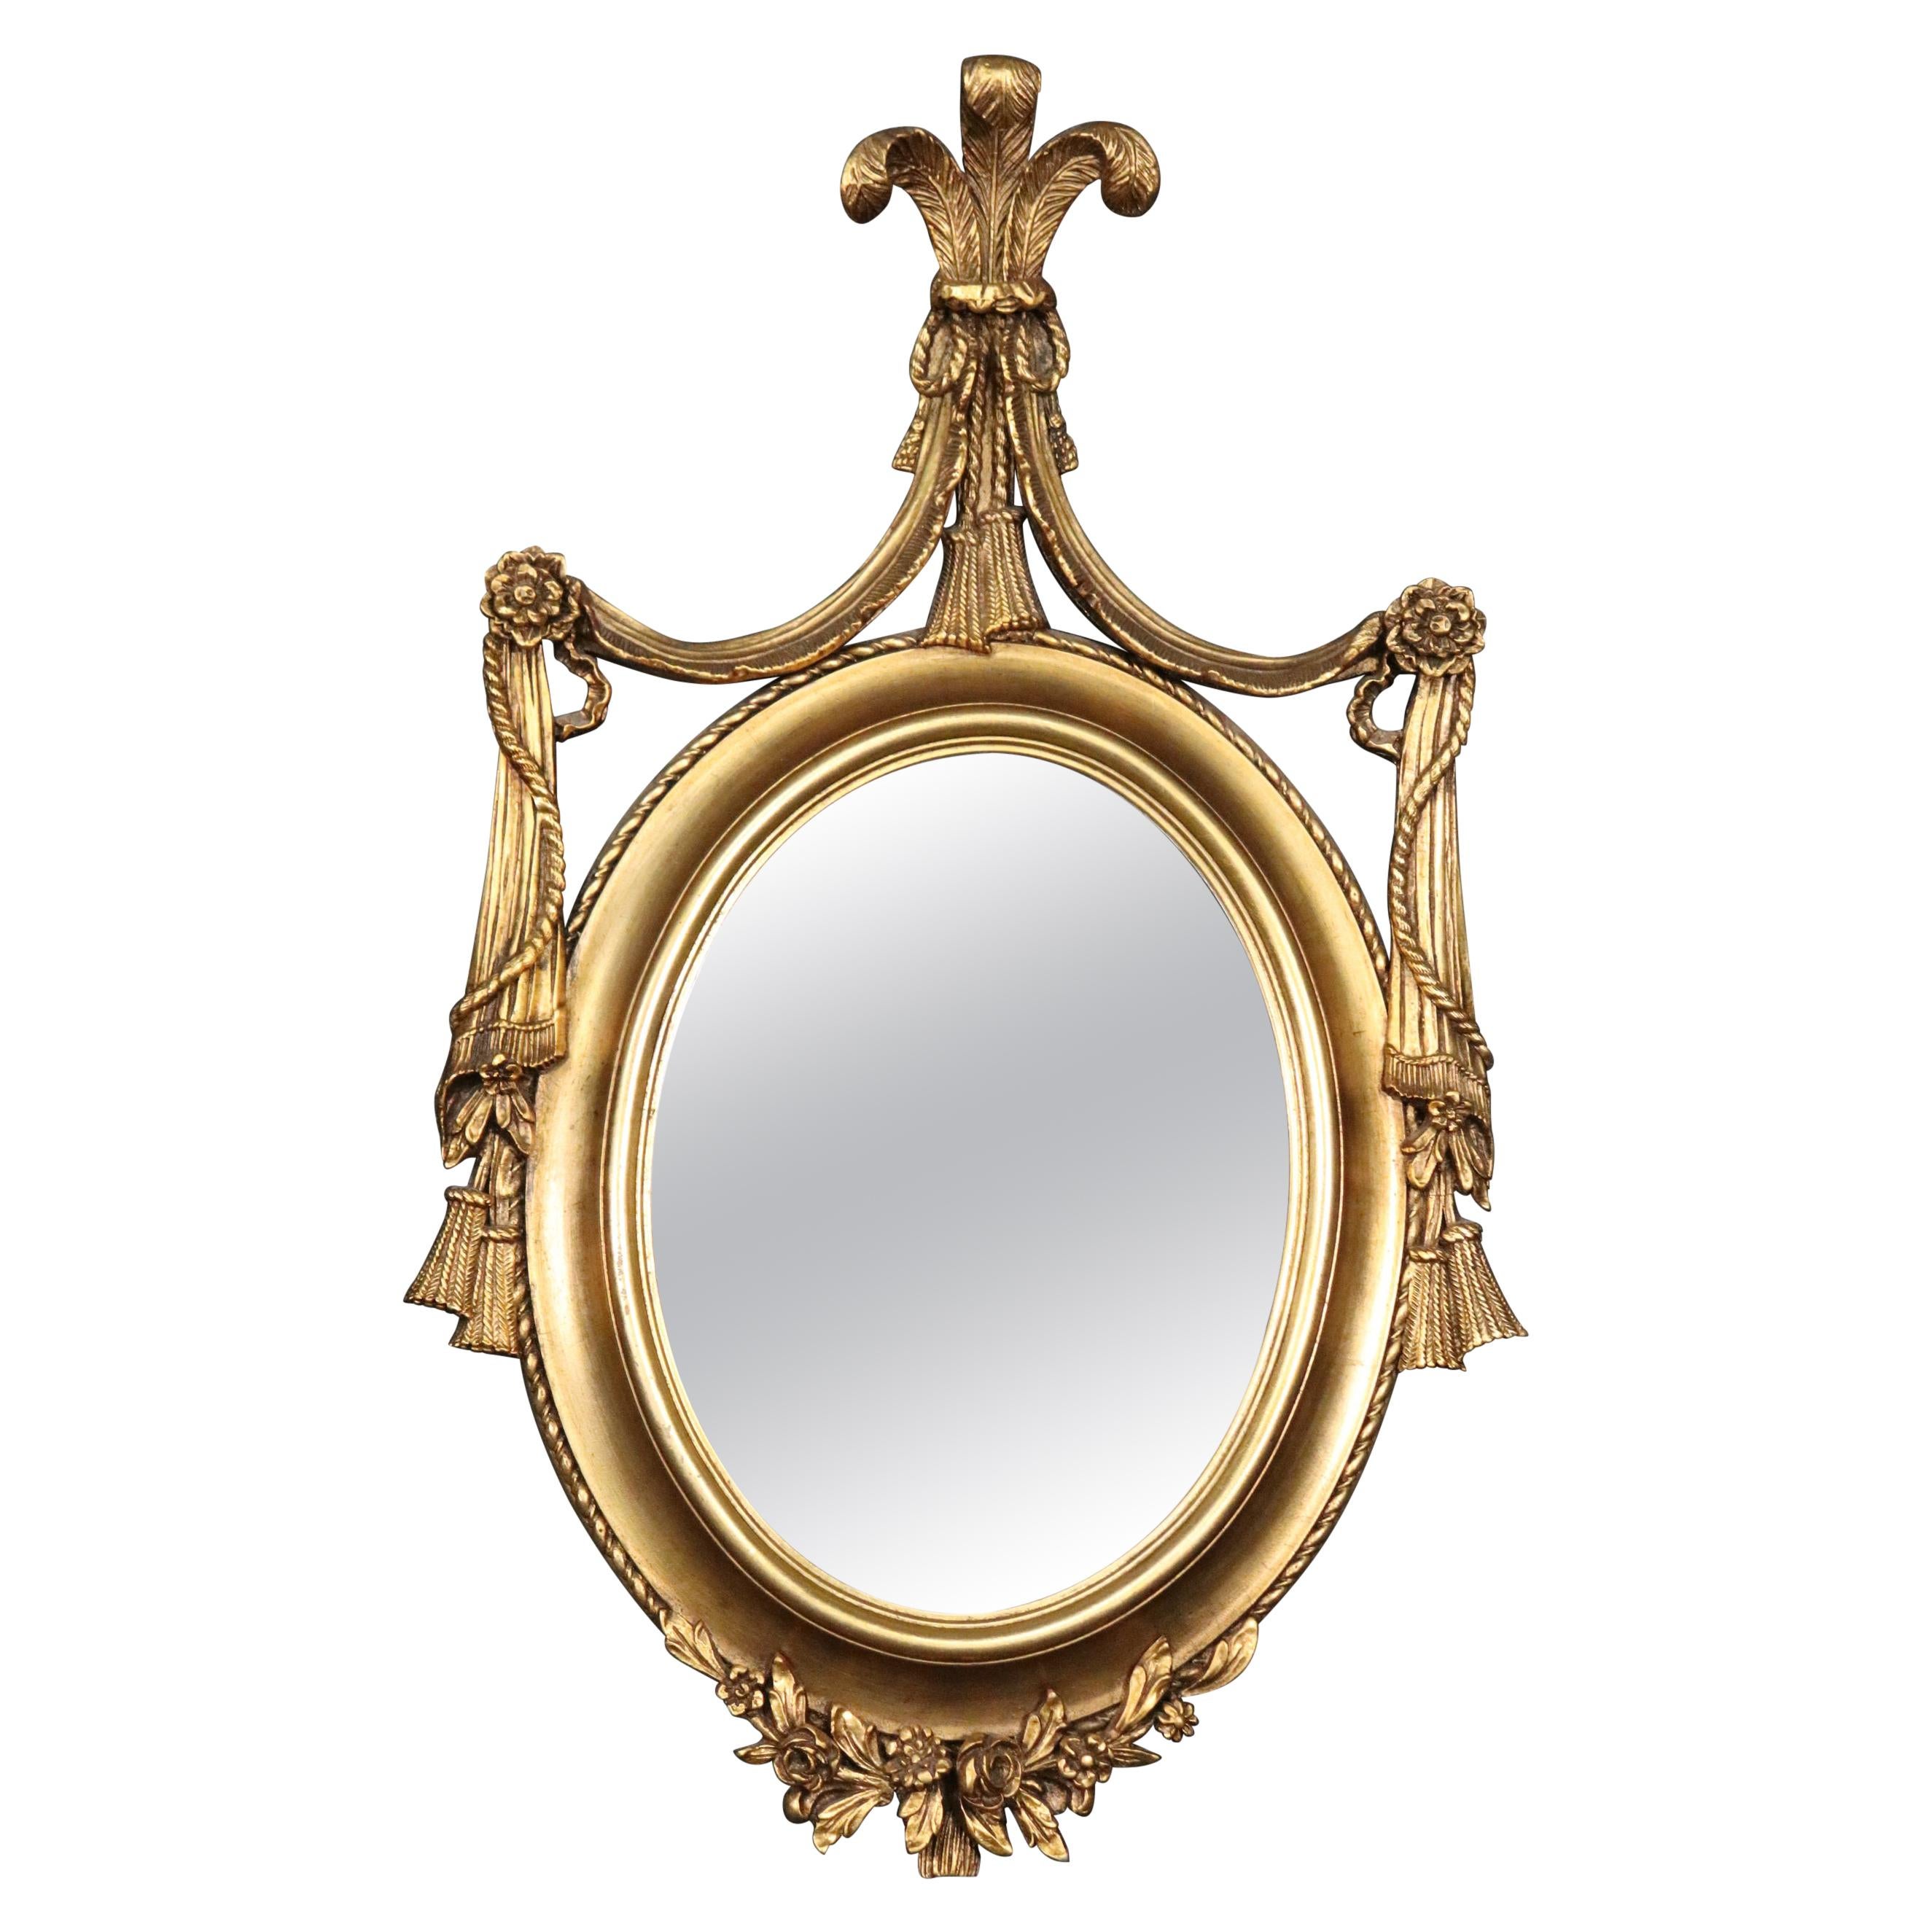 Gilded Adams Style Oval Mirror with Decorative Elements